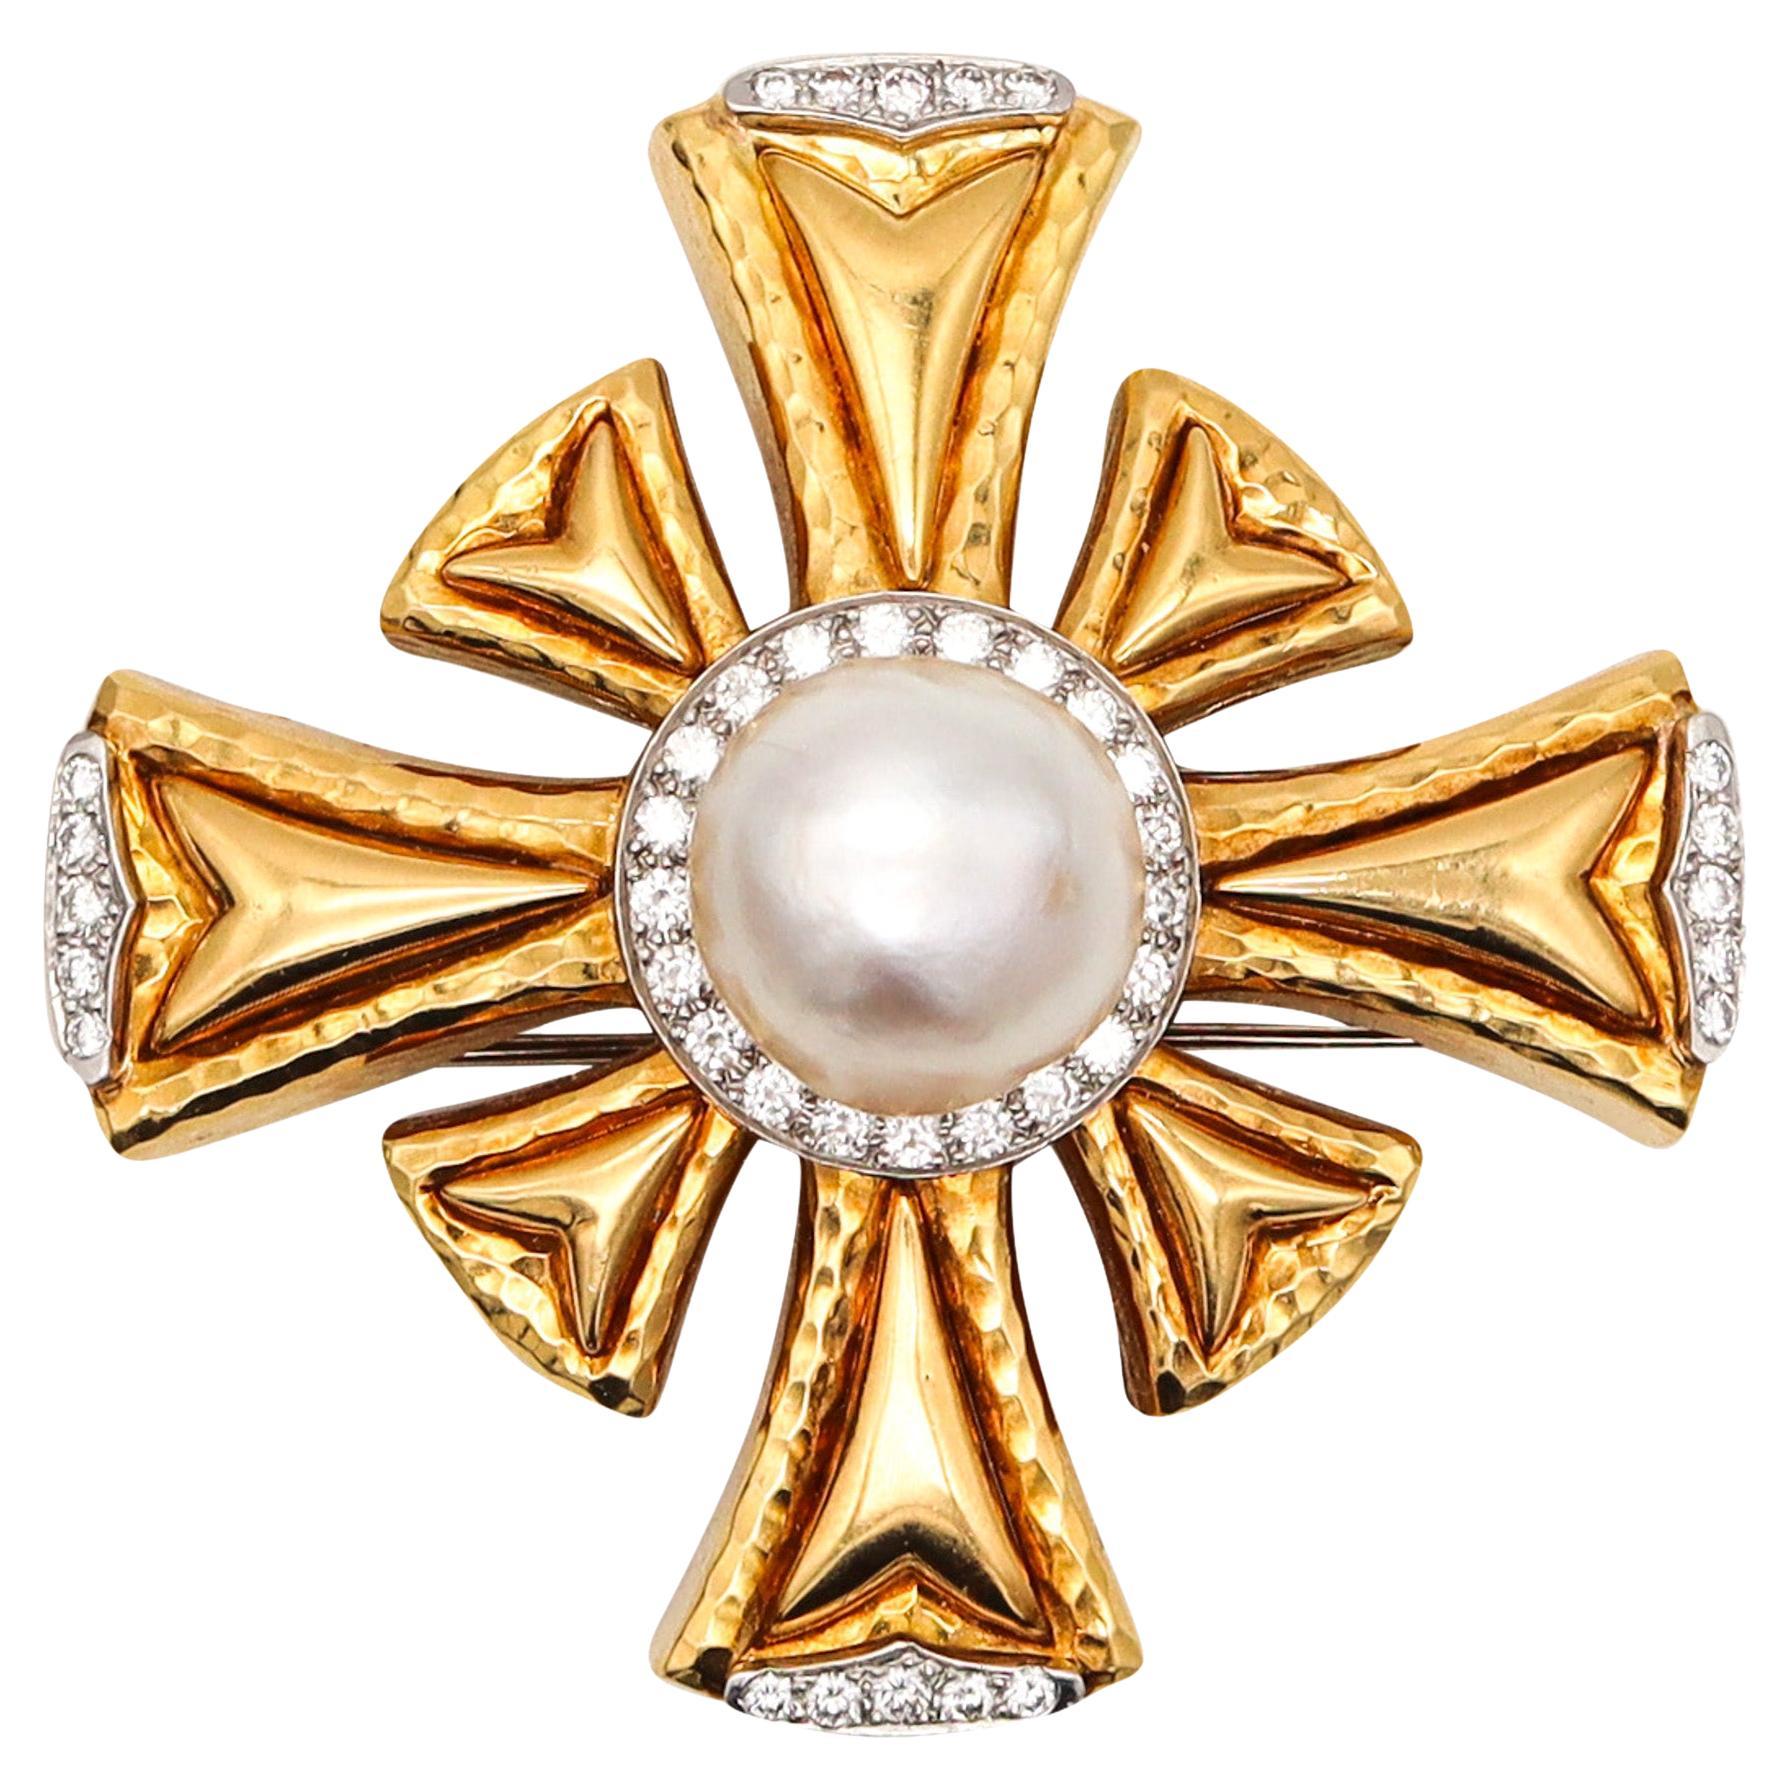 Andrew Clunn Pendant Brooch In 18Kt Gold And Platinum With 2.46 Ctw In Diamonds For Sale